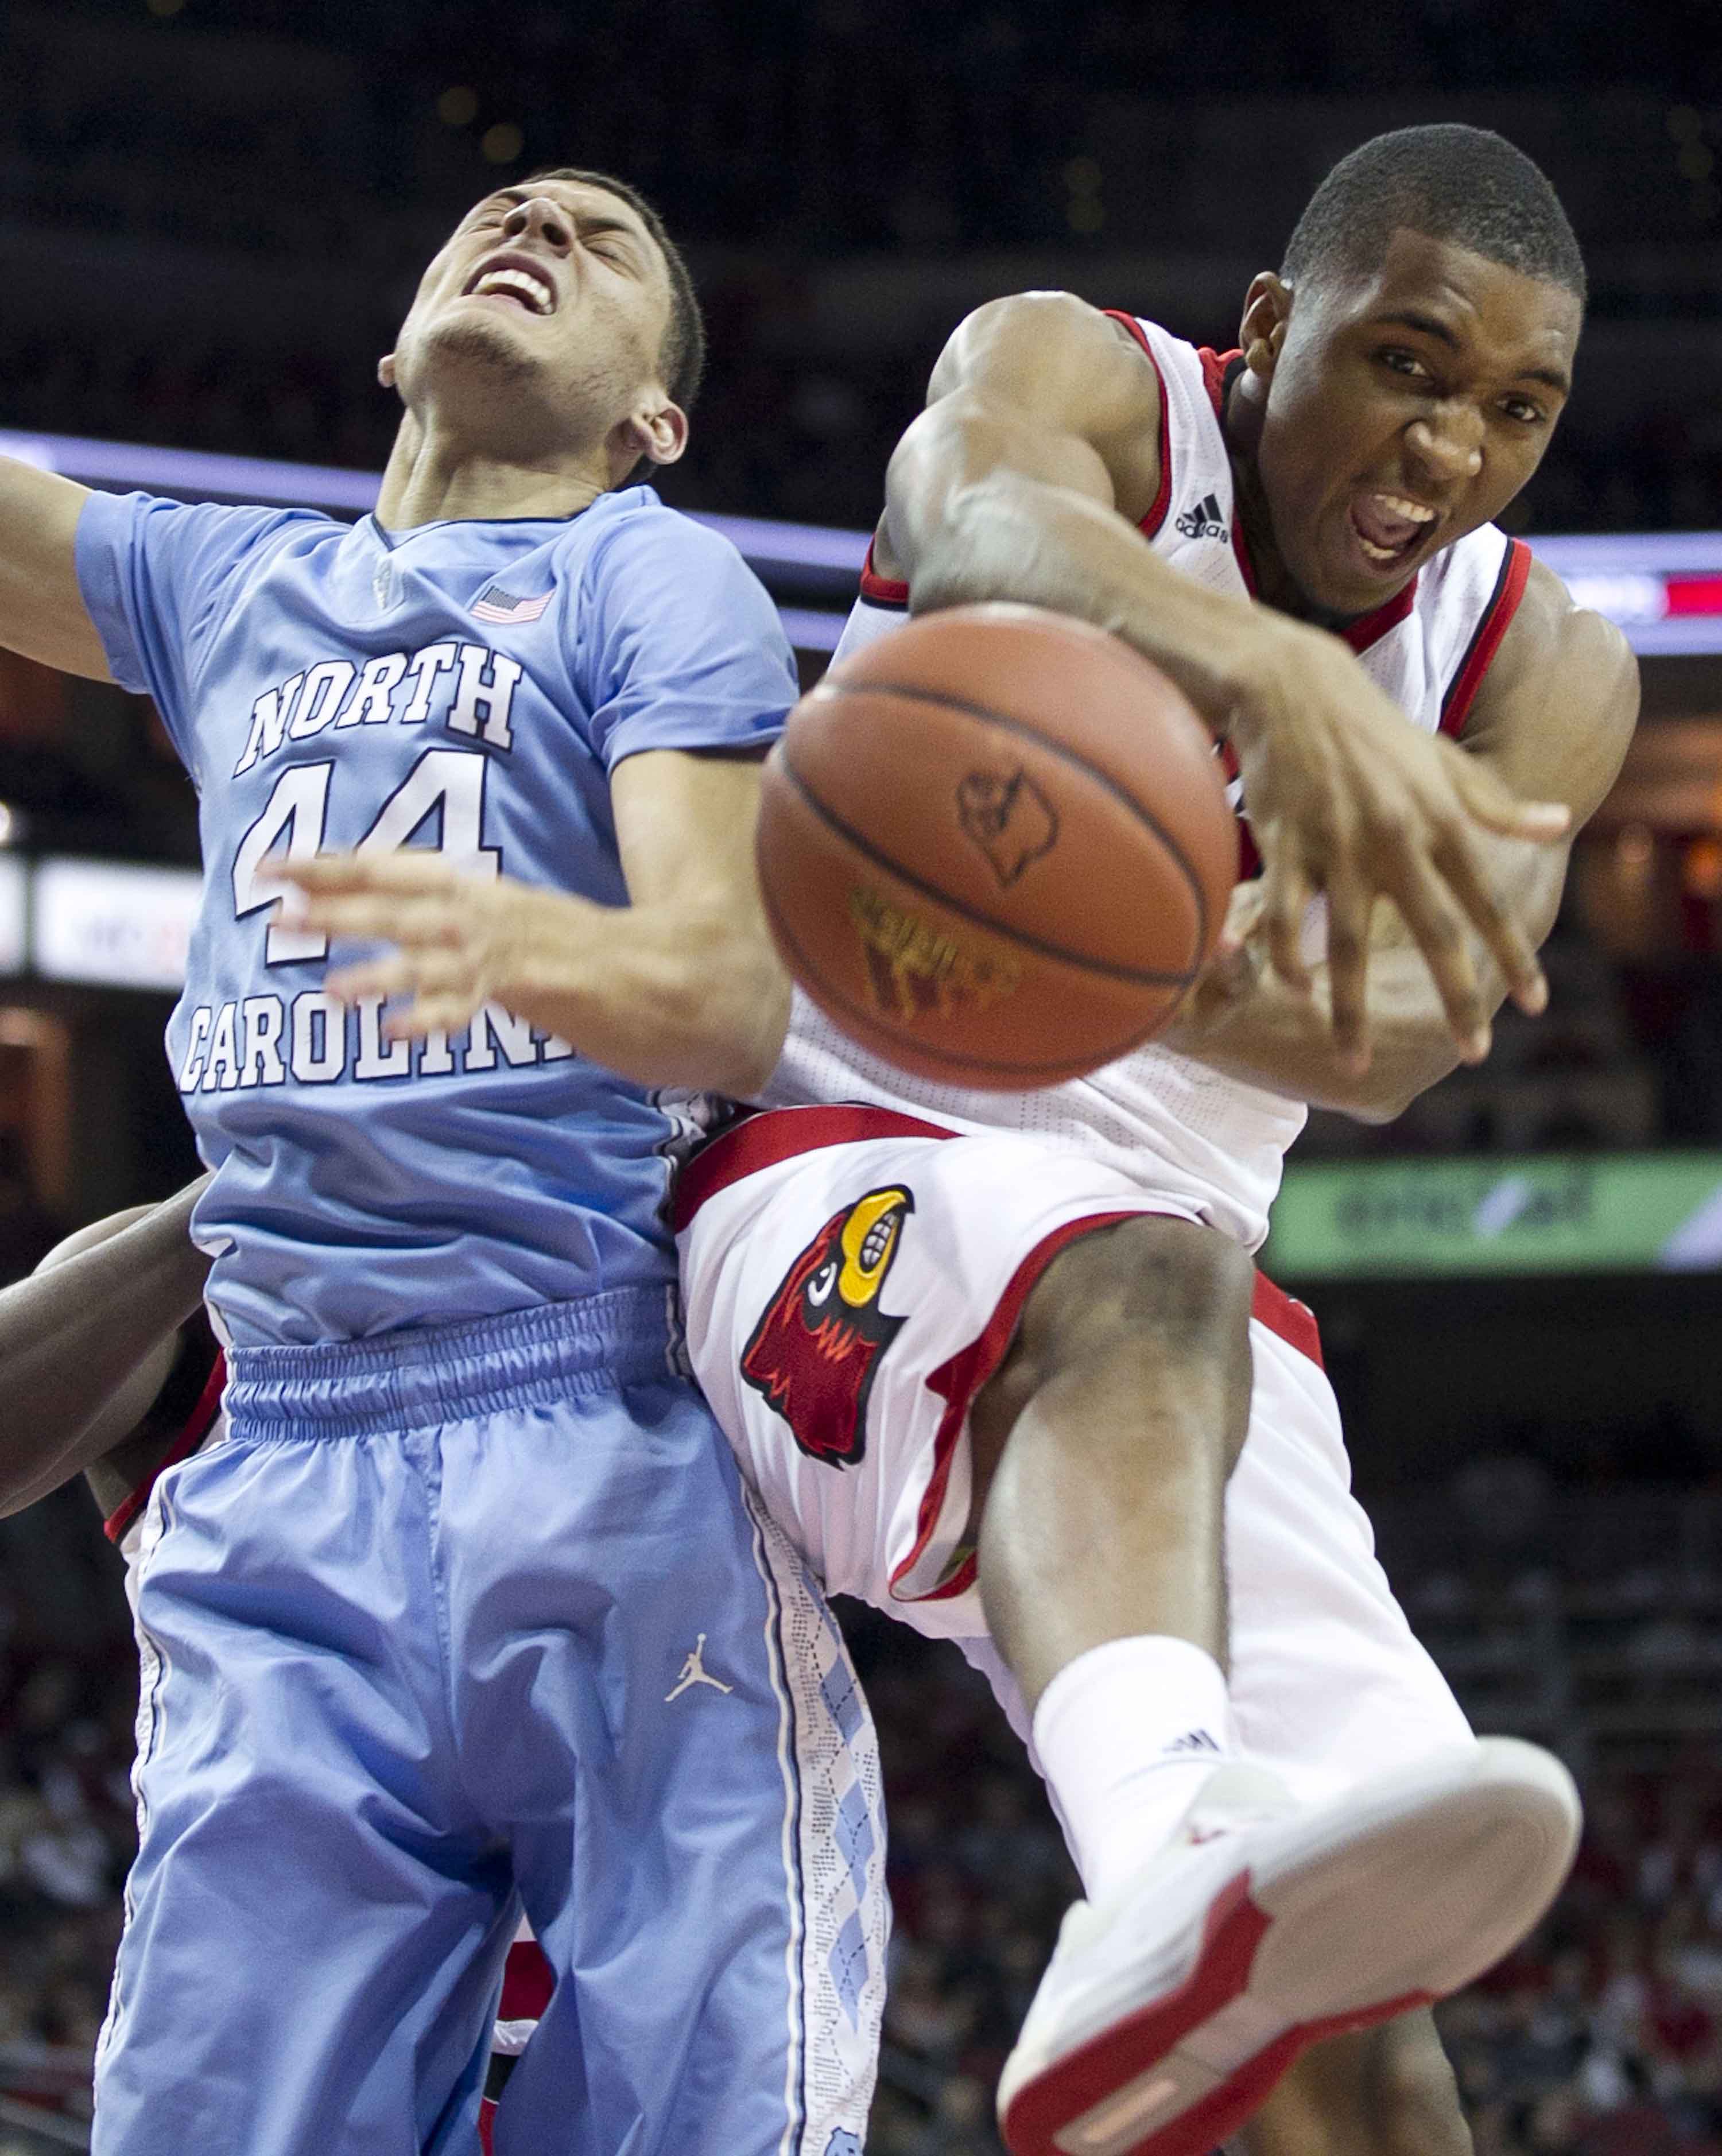 Louisville's Donovan Mitchell (45) secures a defensive rebound from North Carolina's Justin Jackson (44) during the second half on Monday, Feb. 1, 2016, at the KFC Yum! Center in Louisville, Ky. (Robert Willett/Raleigh News & Observer/TNS)